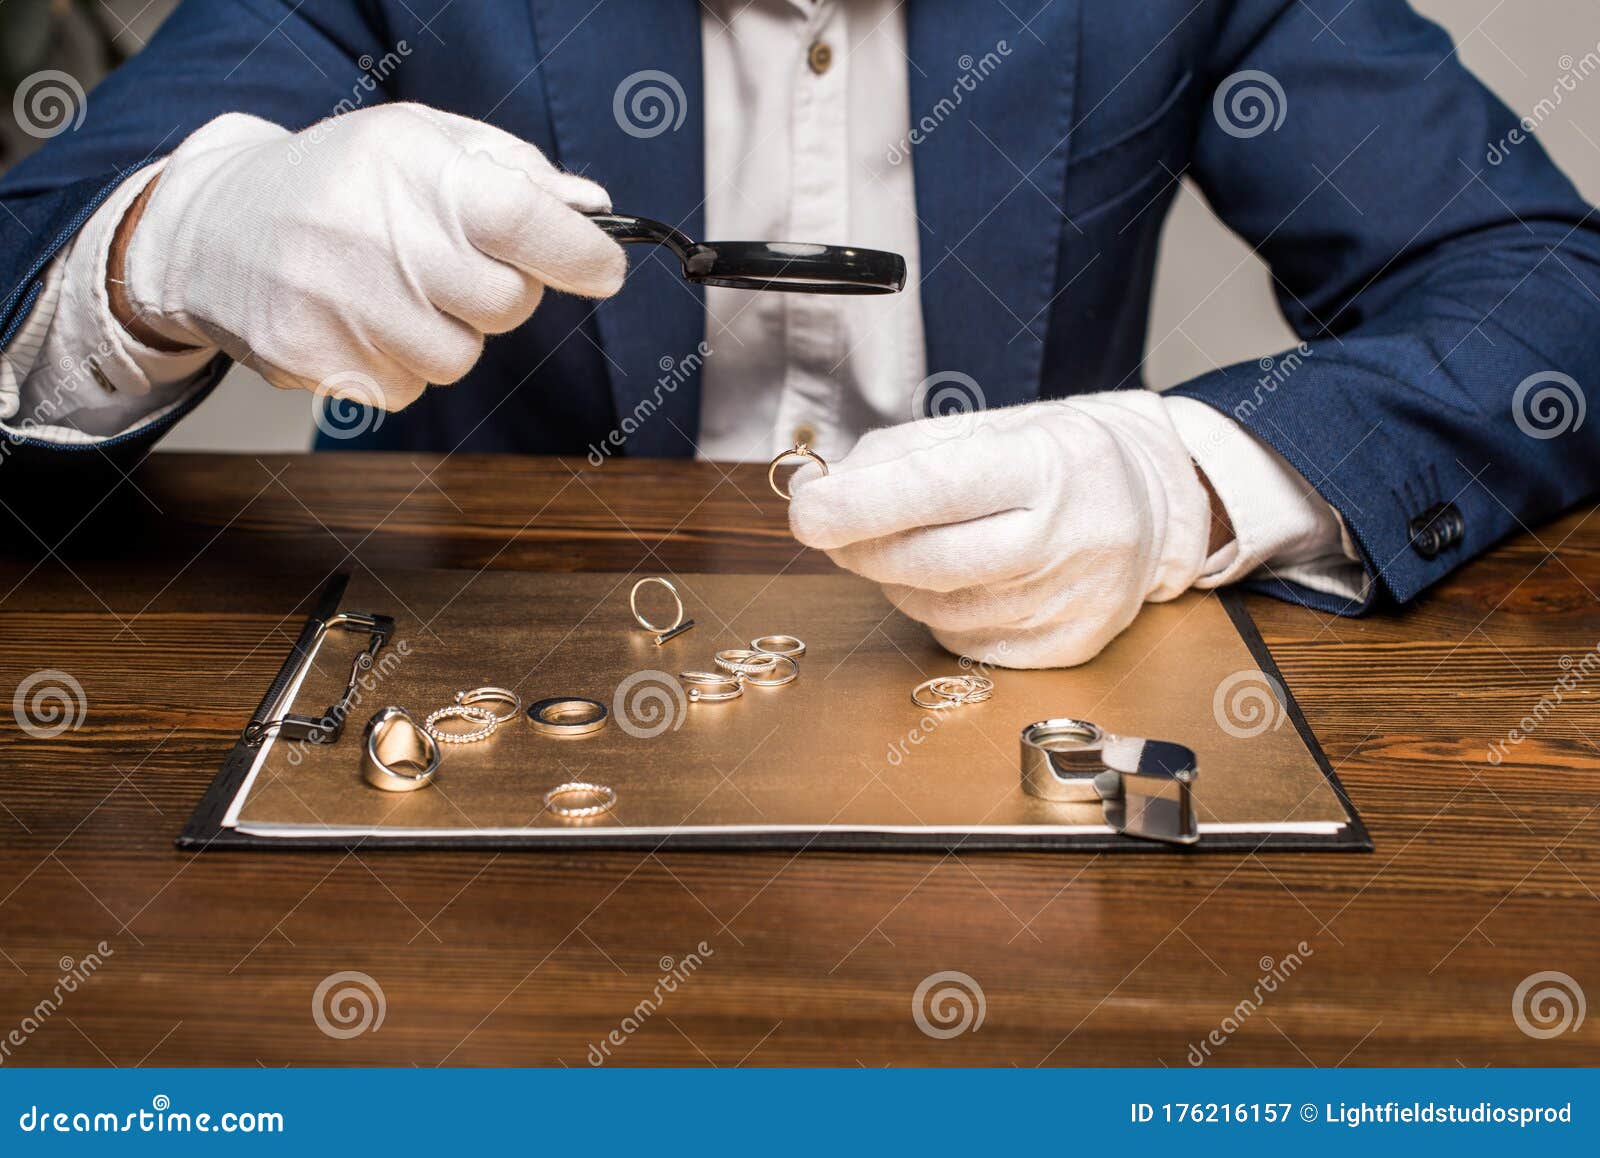 View Of Jewelry Appraiser With Magnifying Stock Image ...